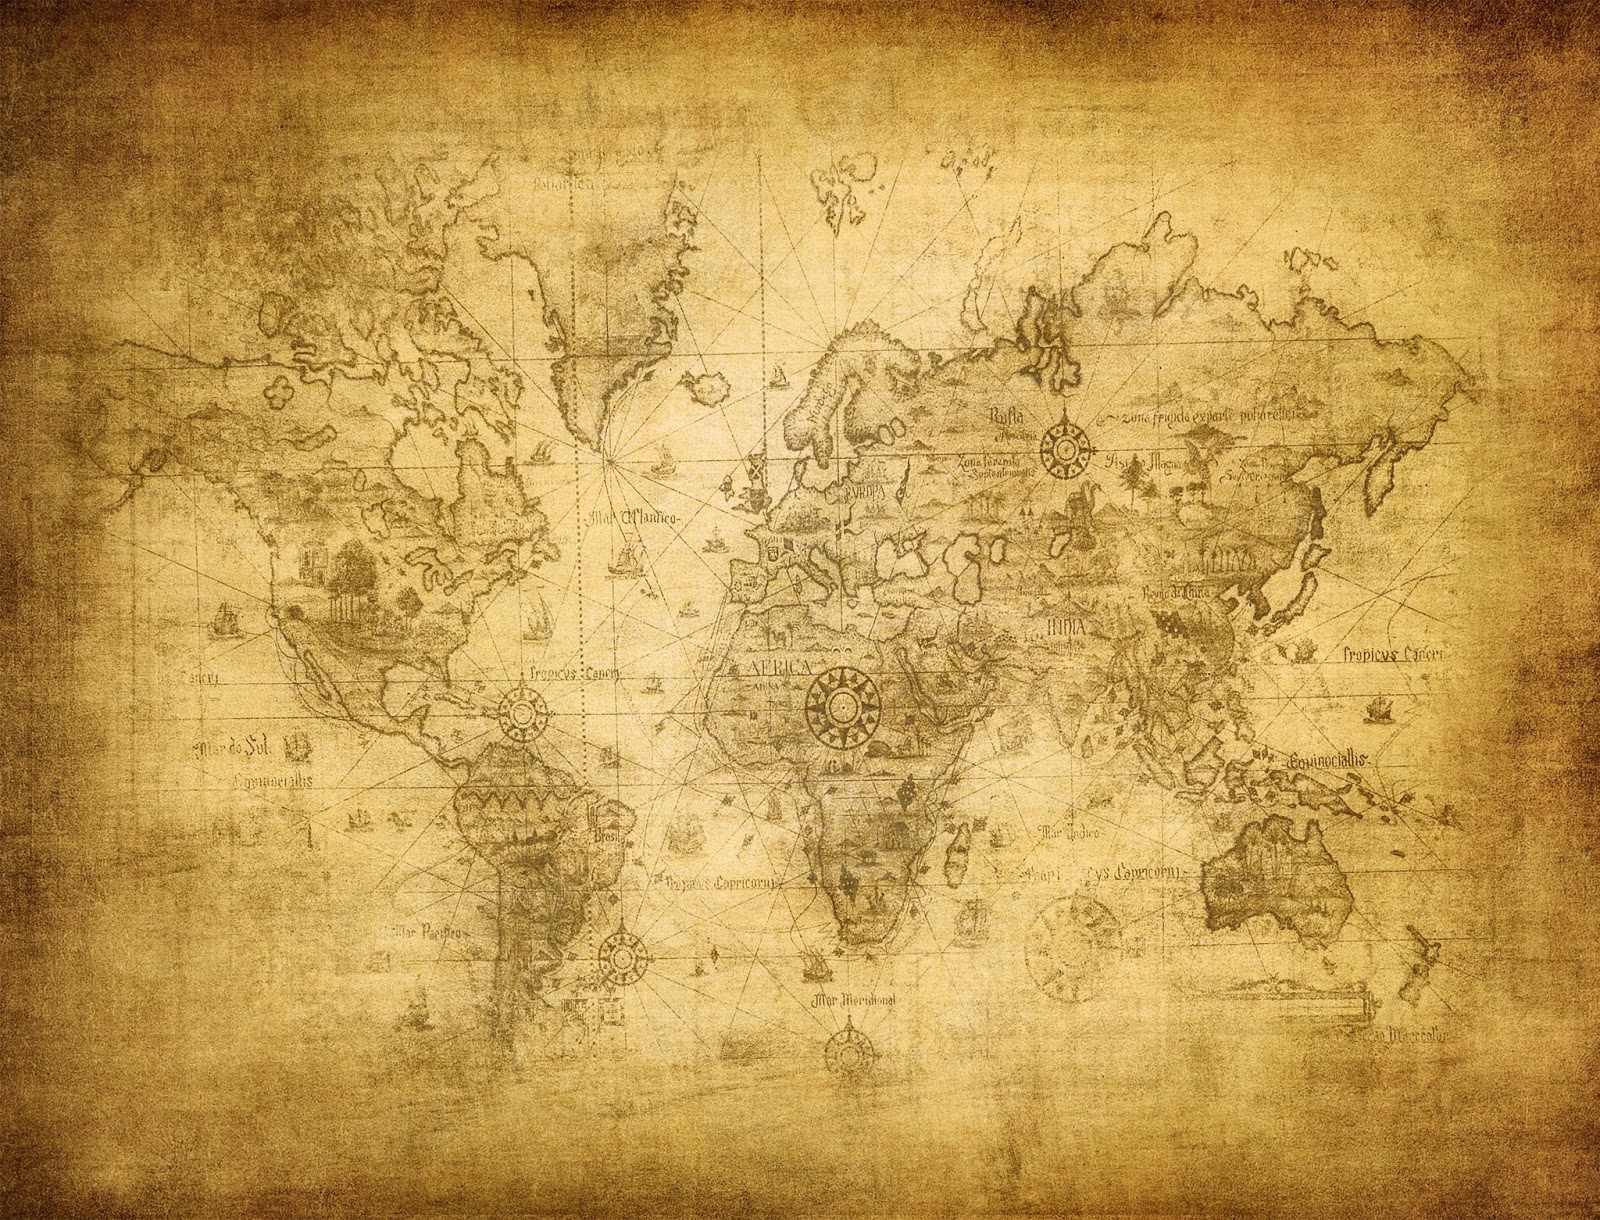 Old Map Background Images amp Pictures   Becuo